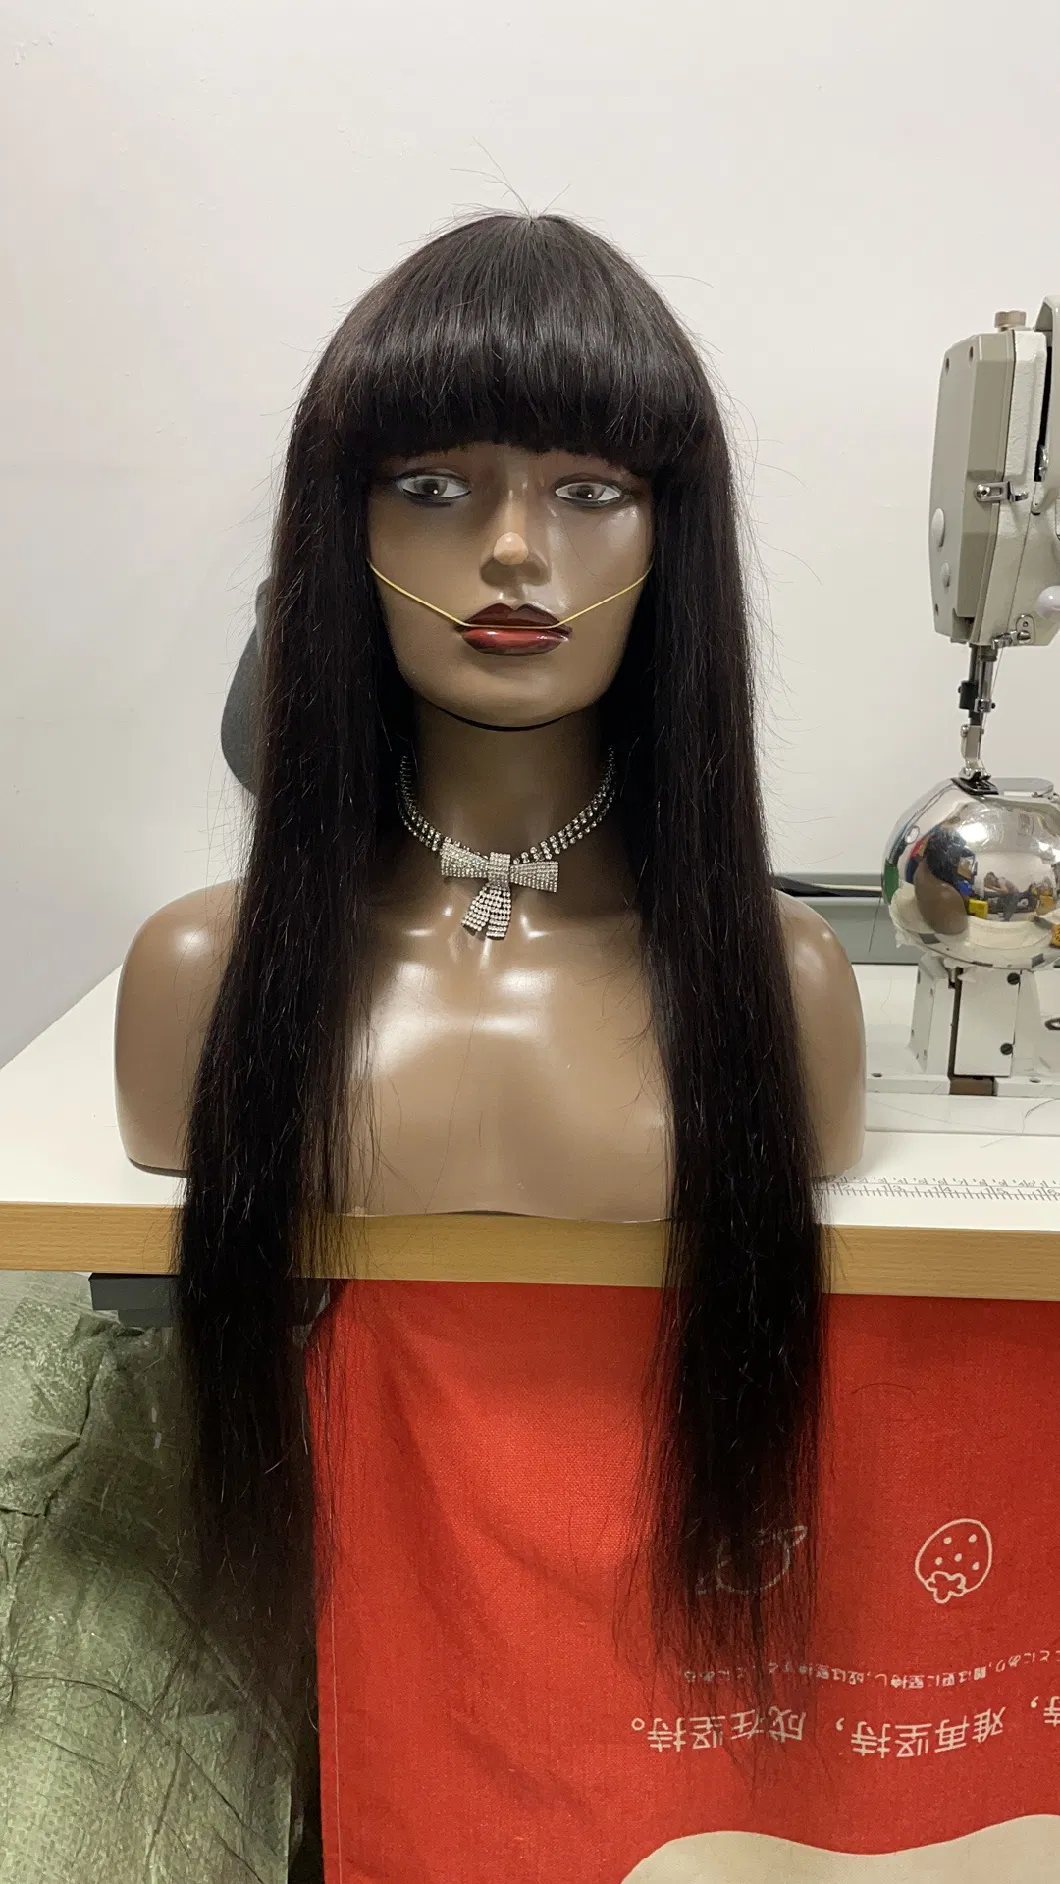 Human Hair Brazilian Virgin Frontal Wigs with Bangs Lace Front with 360 Frontal HD Straight Lace Front Wigs with Baby Hair